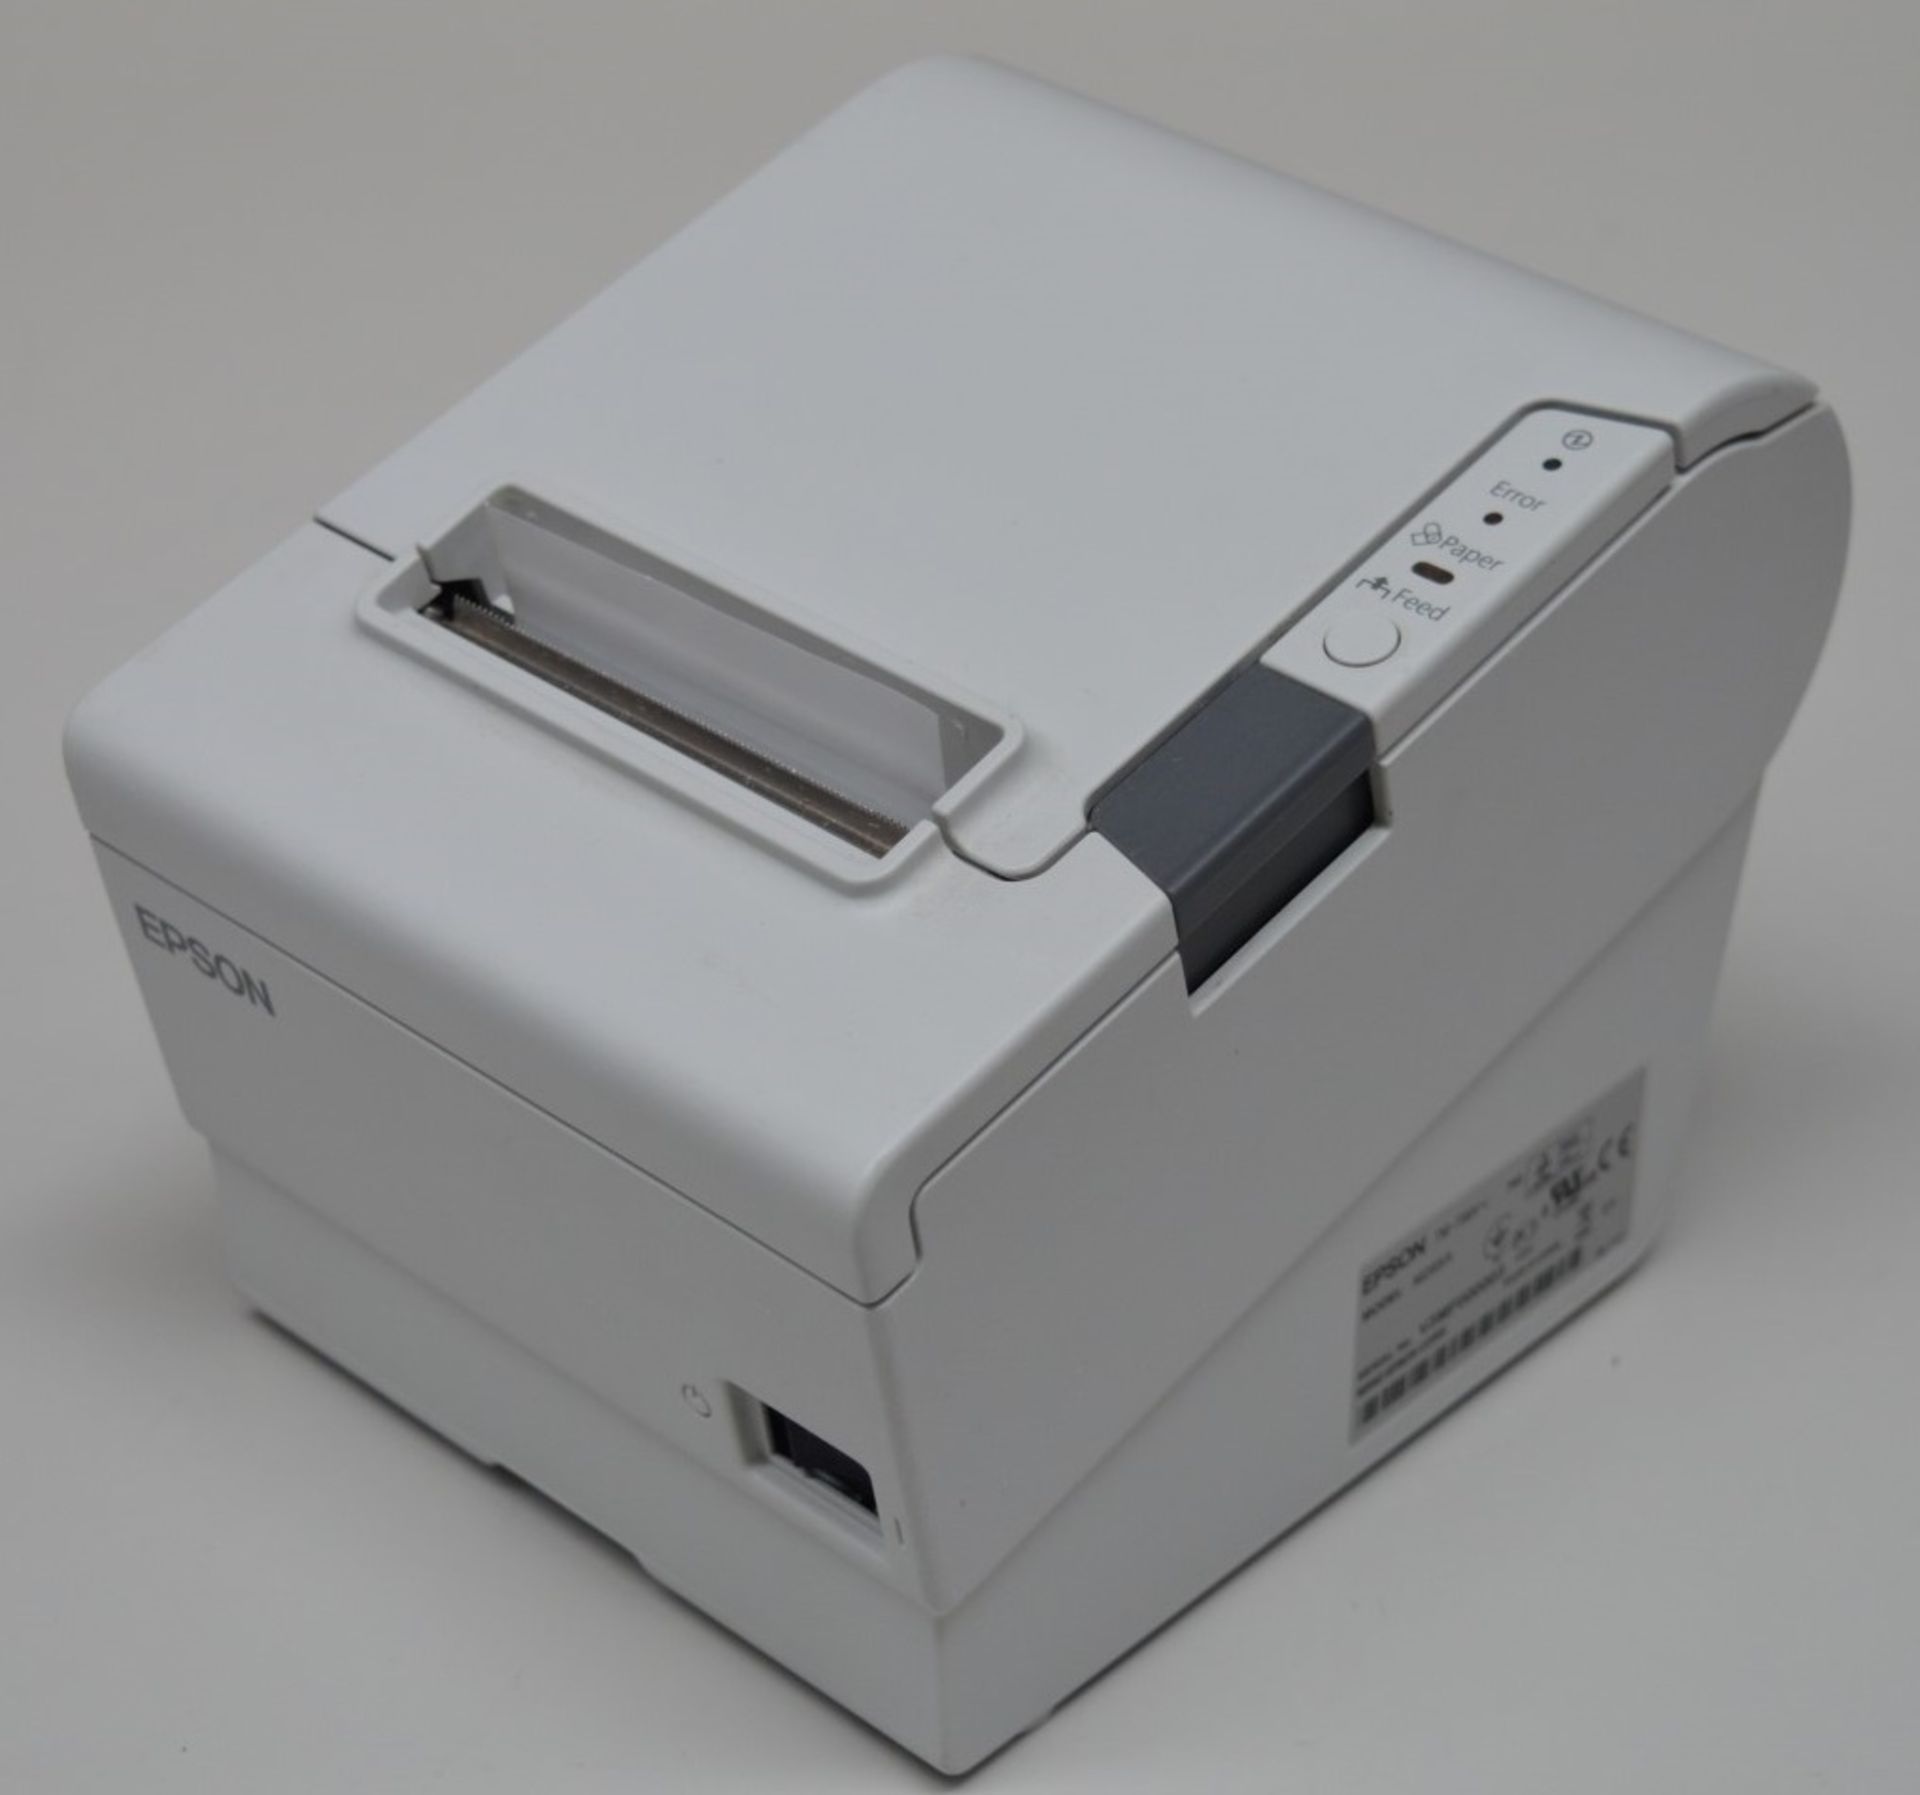 1 x Epson TM-T88VI Intelligent Thermal Receipt Printer - CL164 - Ref CAT023 - RRP Approx £400 - - Image 3 of 10